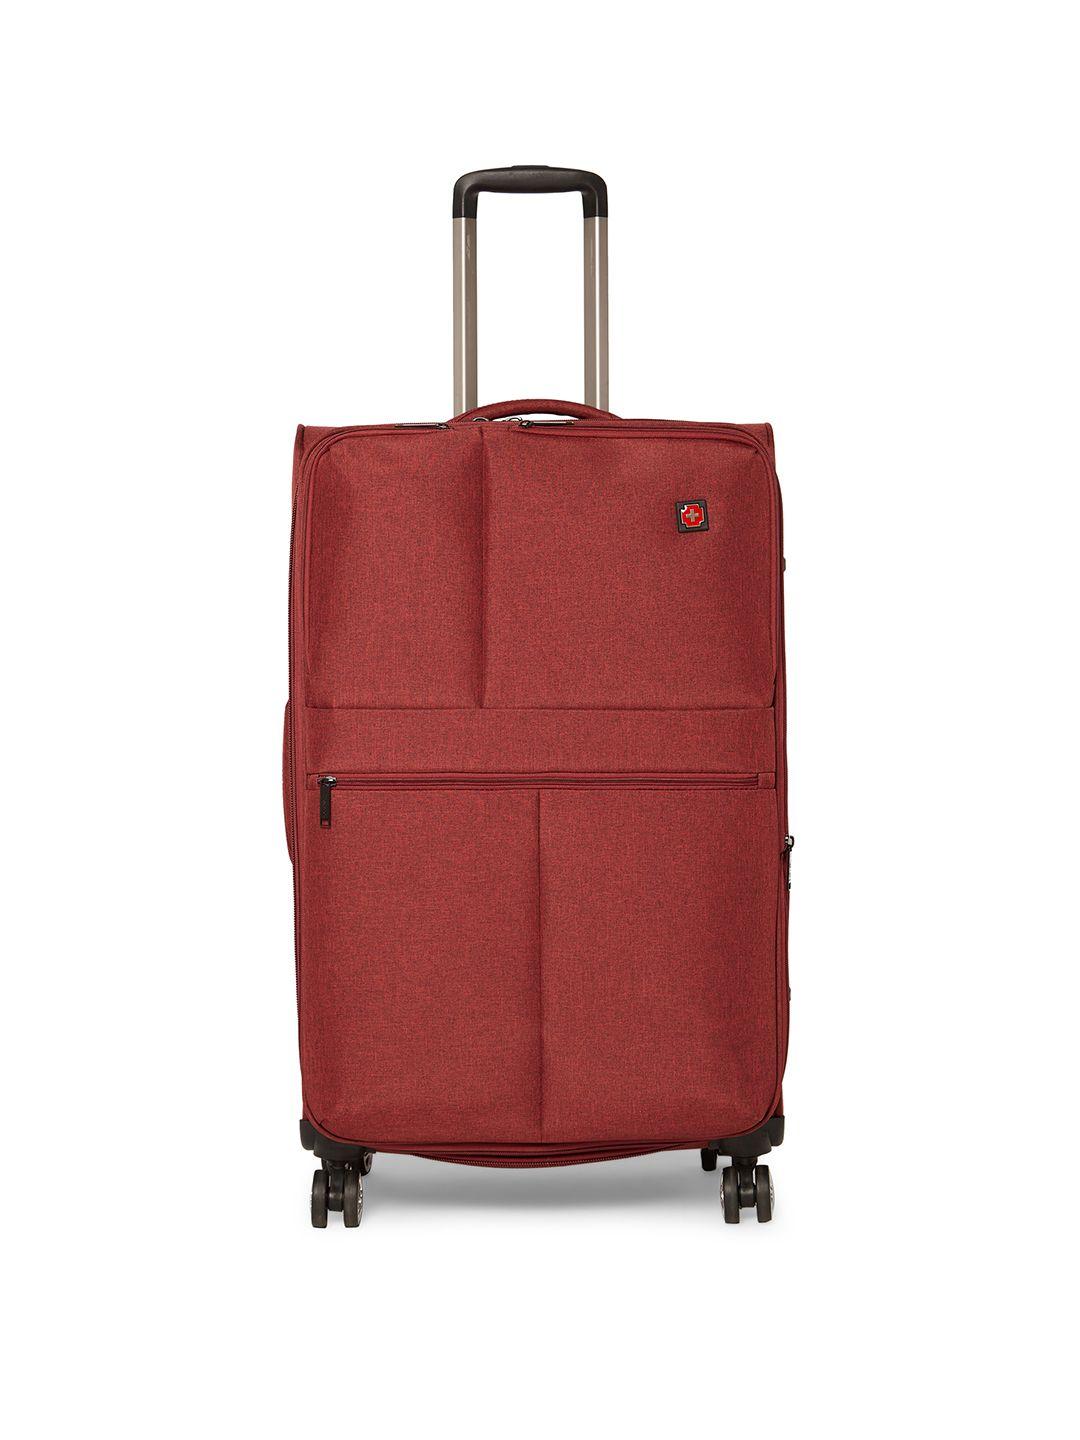 swiss brand vevey rose red soft case 28 inch large trolley bag